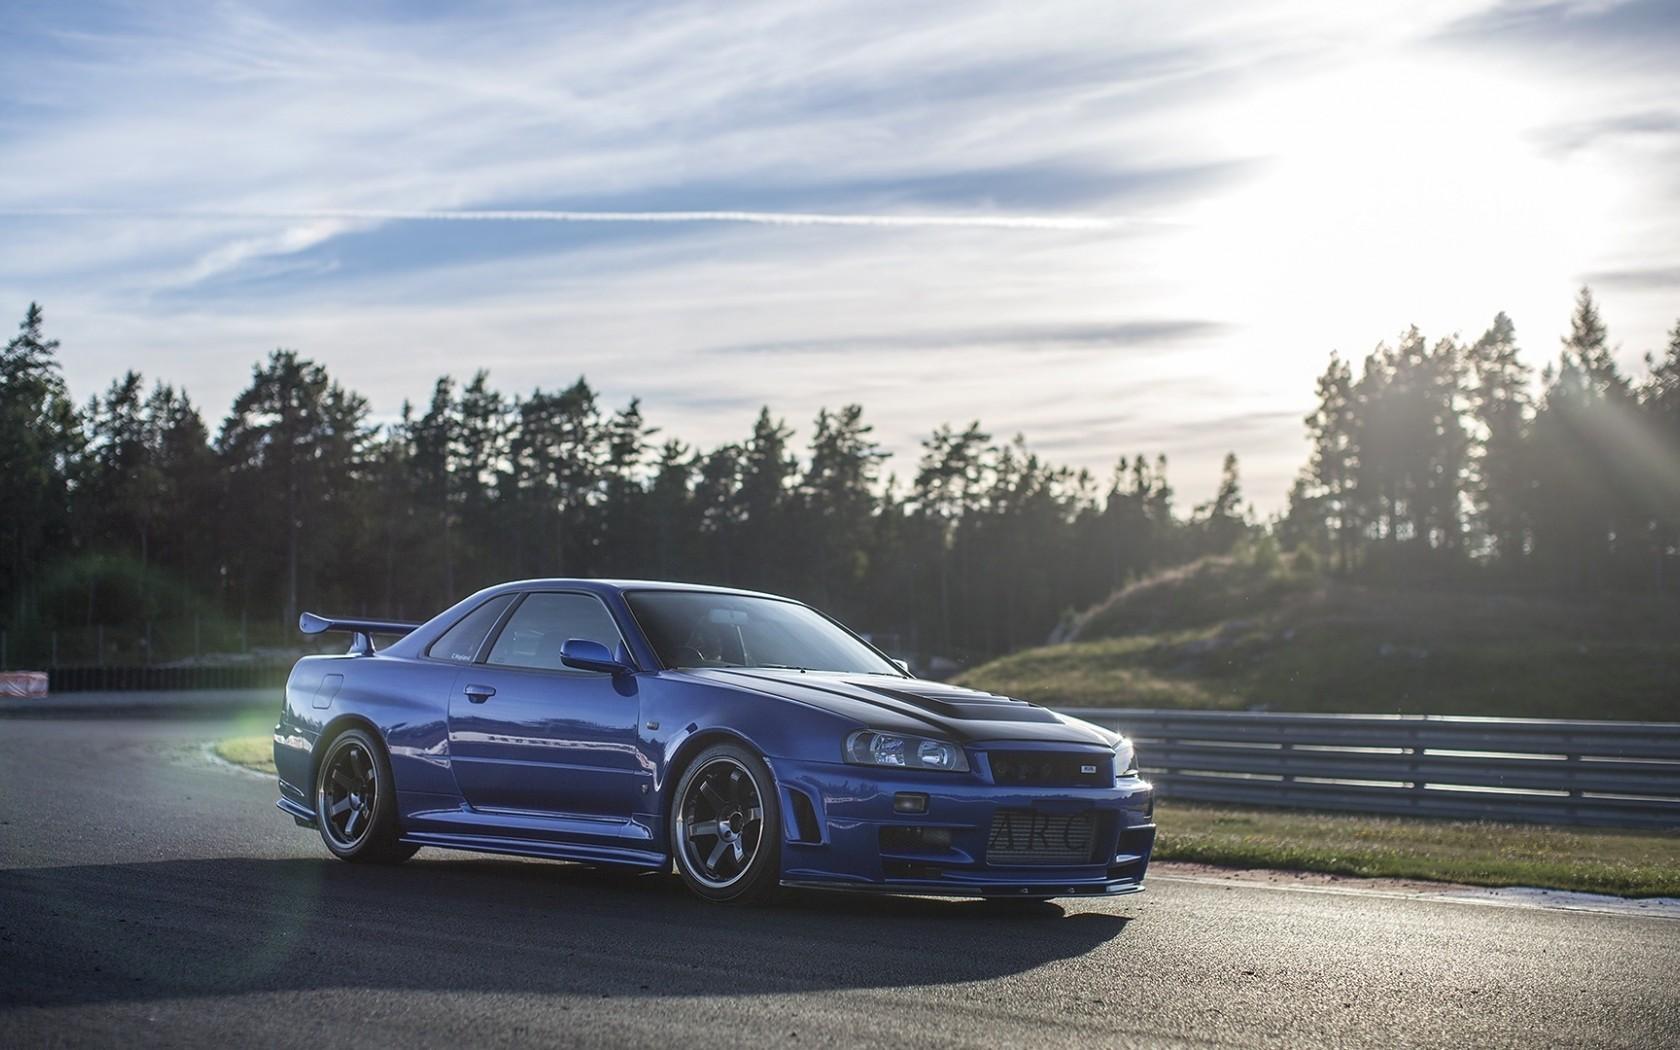 Free Download Nissan Skyline R34 Wallpapers Hd Download 1680x1050